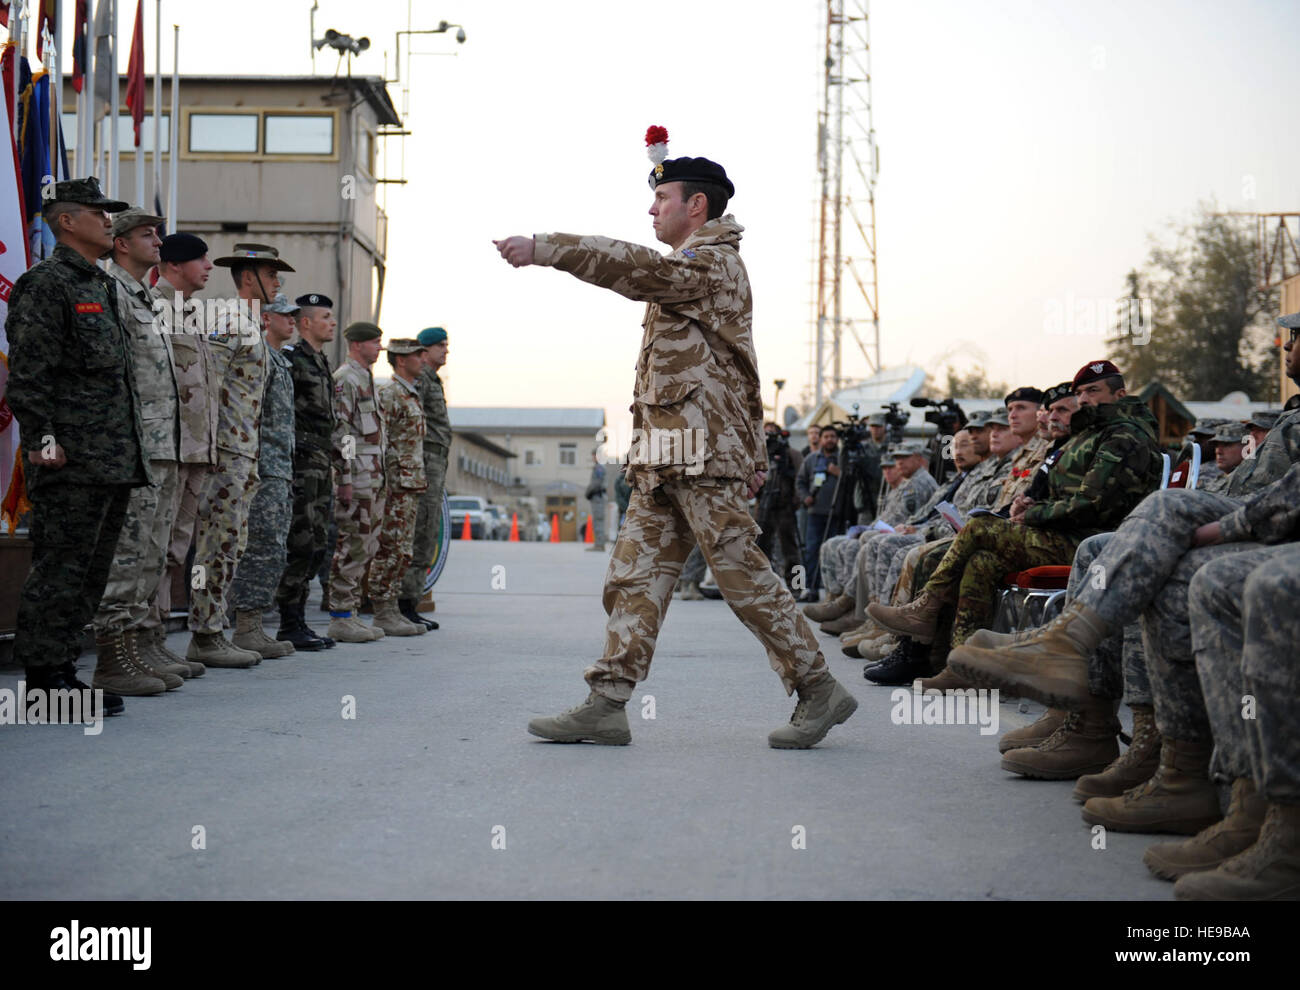 A British Army soldier march up to the coalition forces formation during the Veterans Day ceremony at Camp Eggers, Kabul, Afghanistan, Nov. 11. Ten countries were represented during the commemoration ceremony honoring service members past and present. Stock Photo